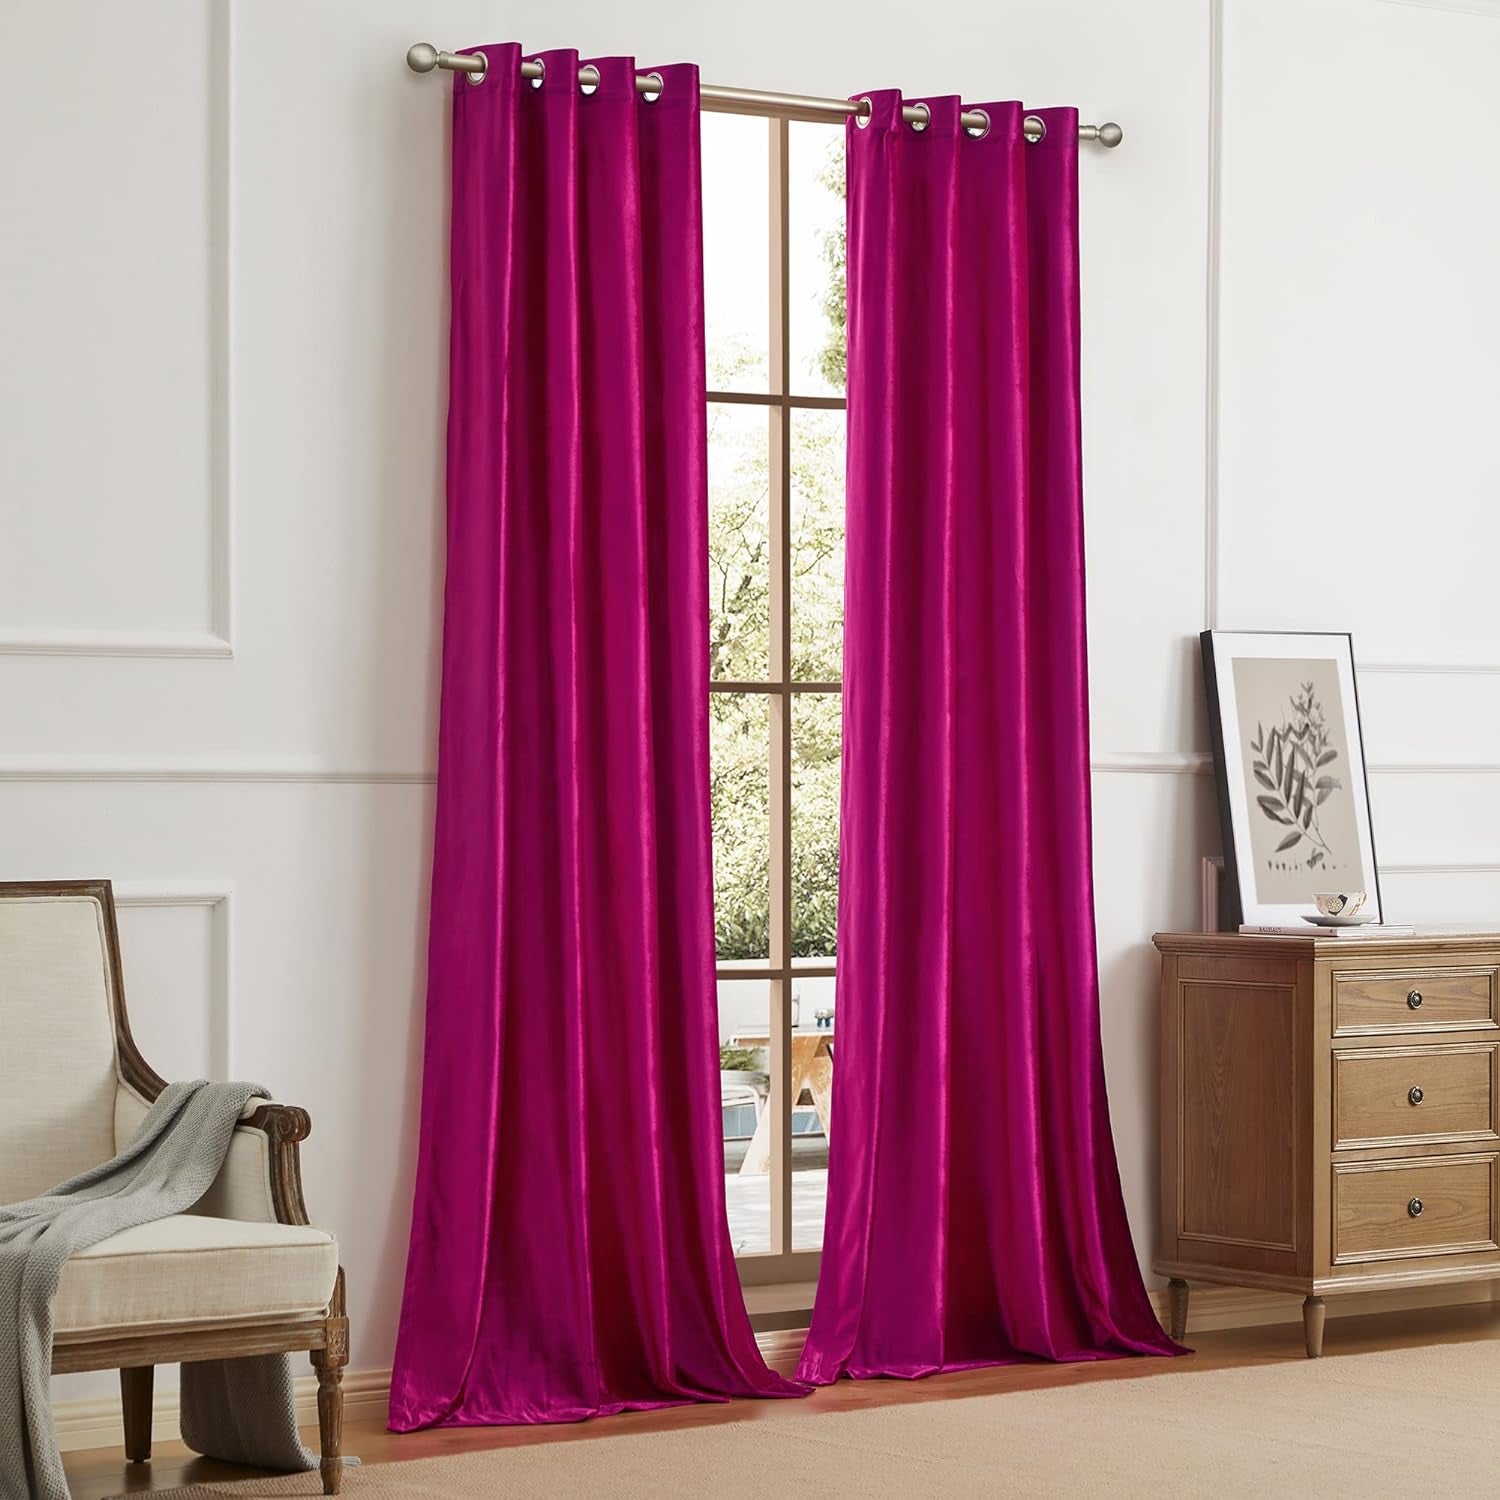 BULBUL Living Room Velvet Window Curtains 84 Inch Length- 2 Panels Hot Pink Blackout Window Drapes Curtains Thermal Insulated Room Darkening Decor Grommet Curtains for Bedroom  BULBUL   